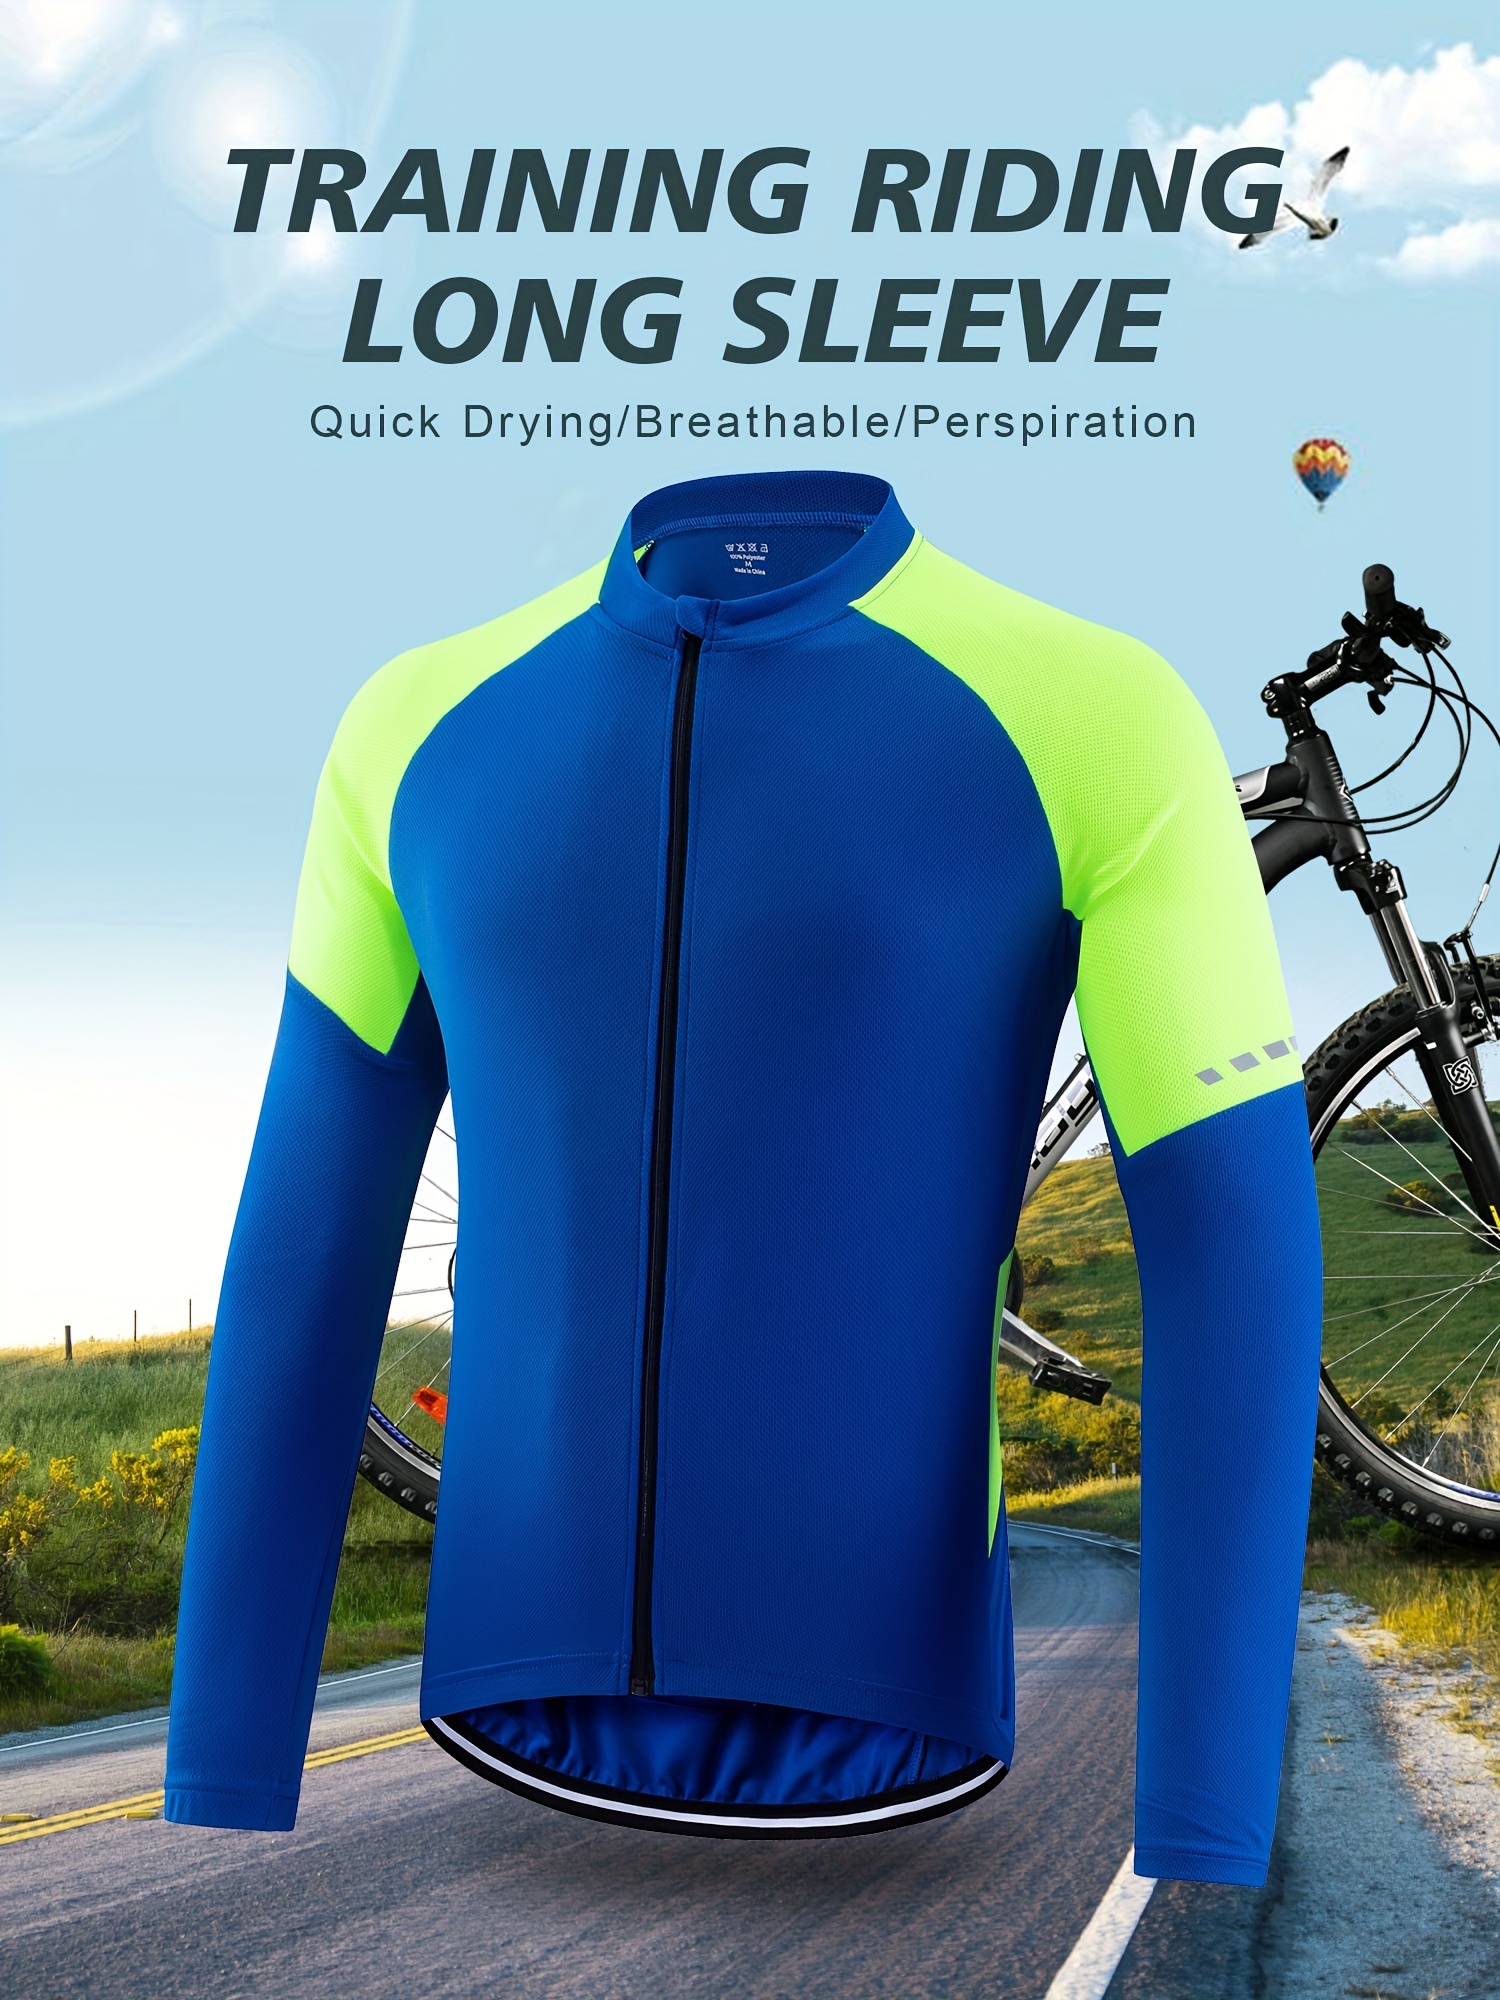 Cool Cycling Jersey Men with Zipper Pocket